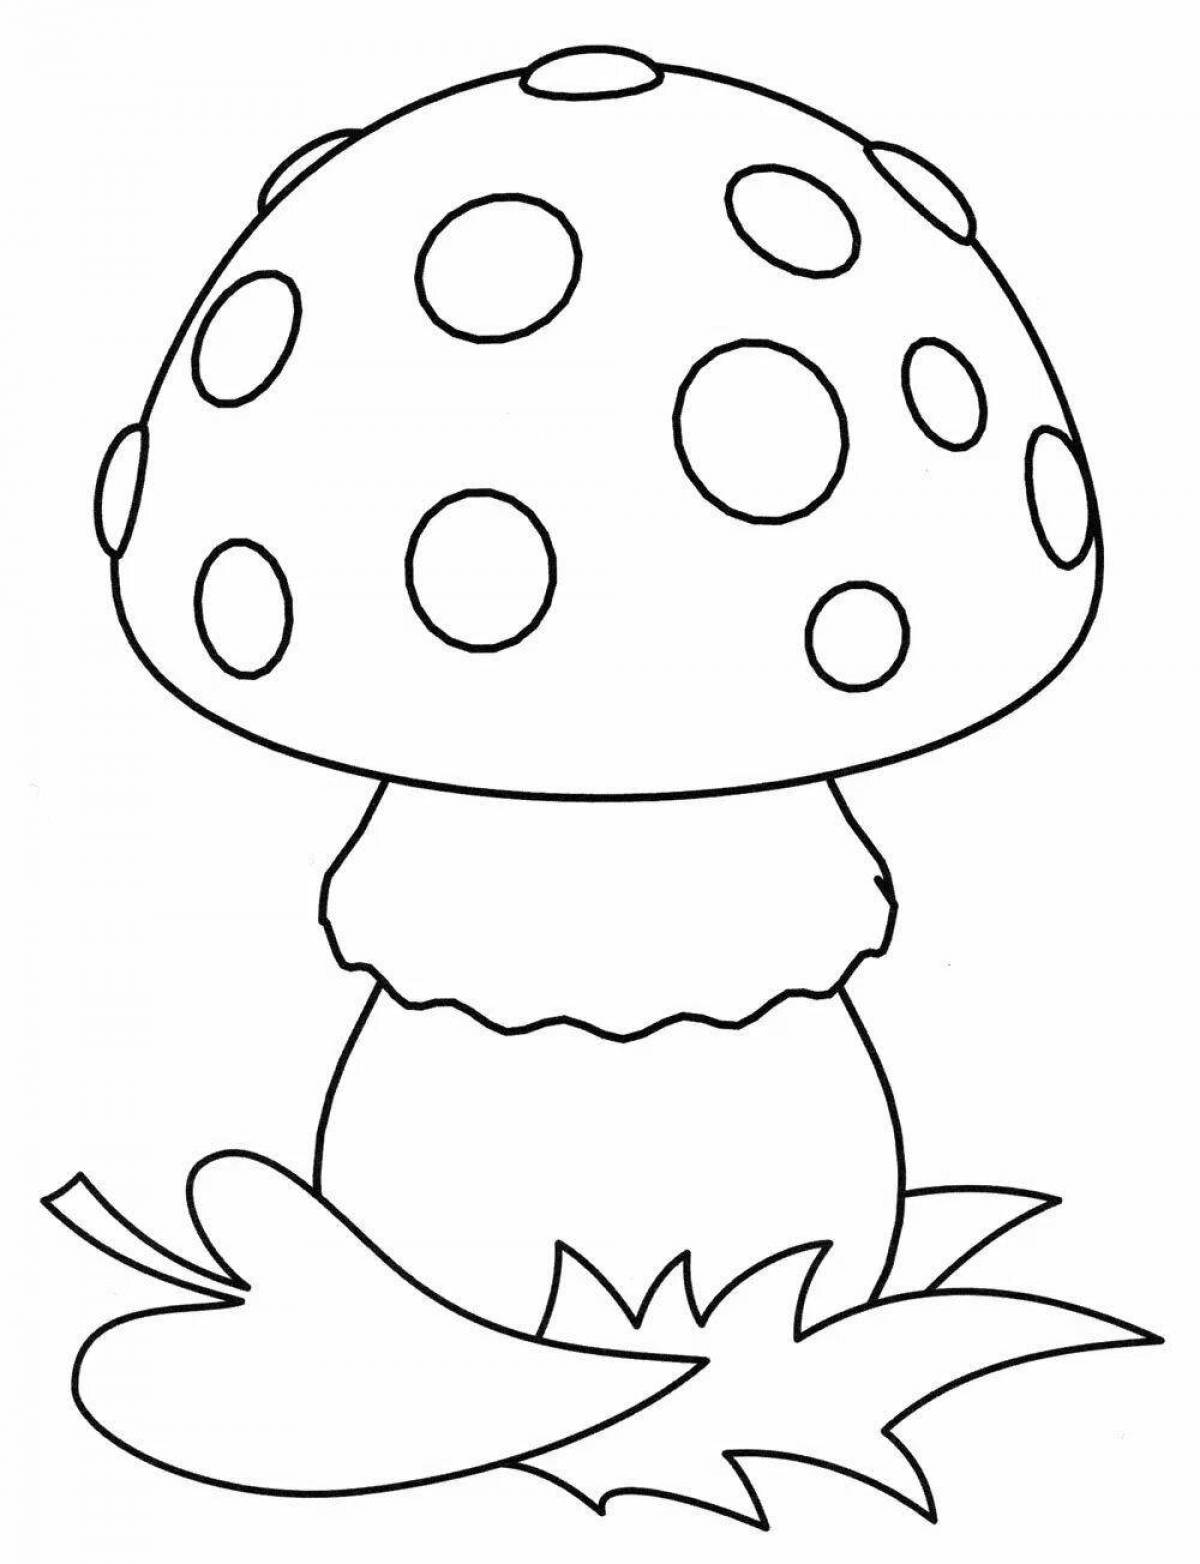 Adorable fly agaric drawing for kids